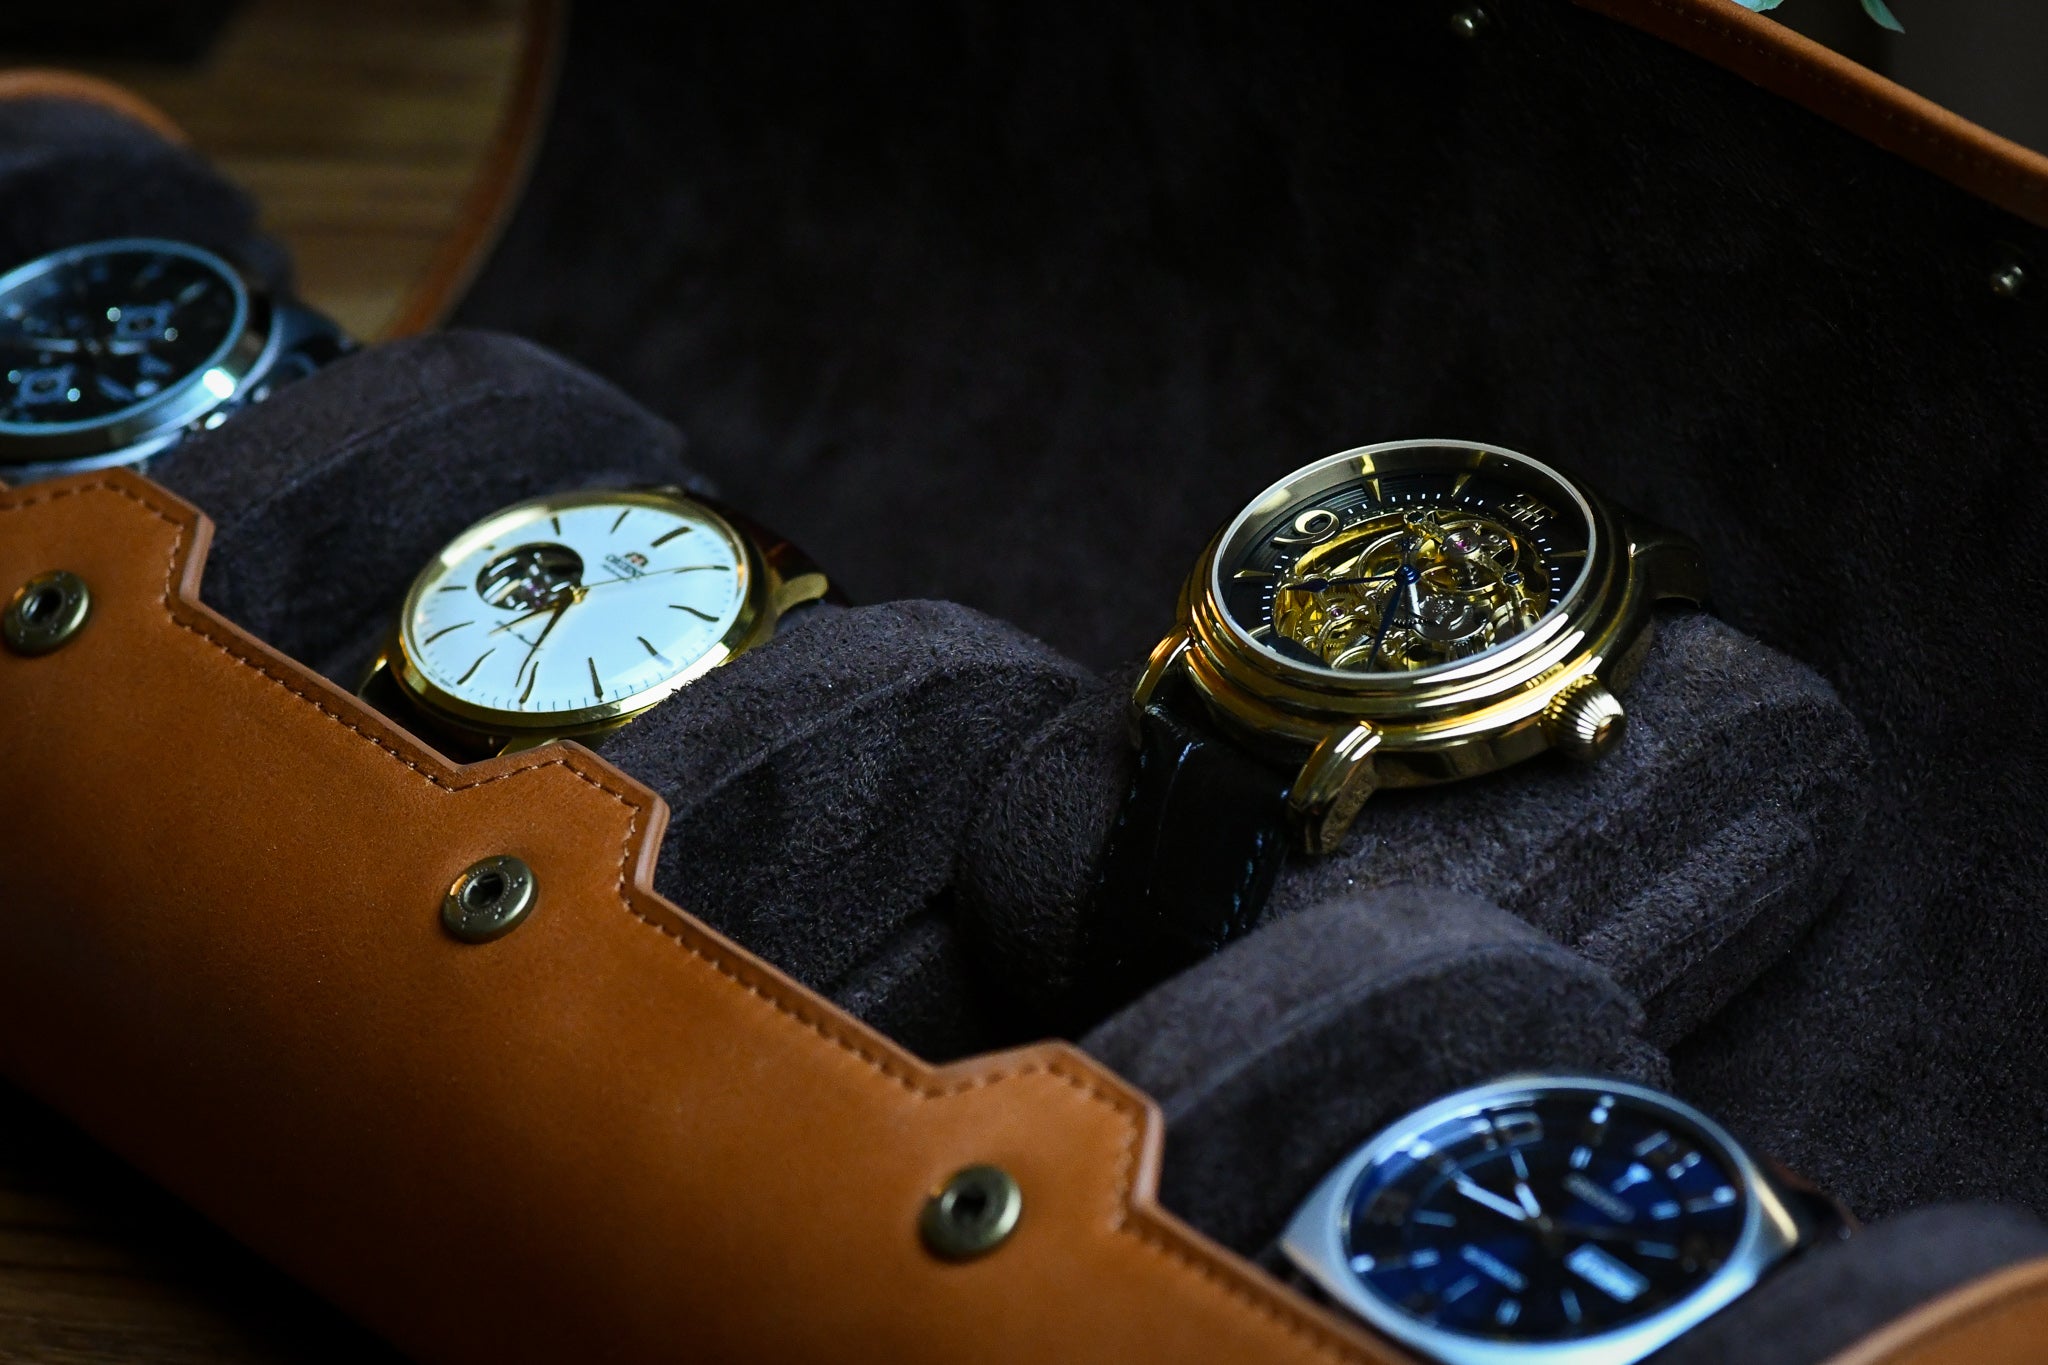 Luxury Ostrich Leather Watch Cases And Watch Rolls- ETIER